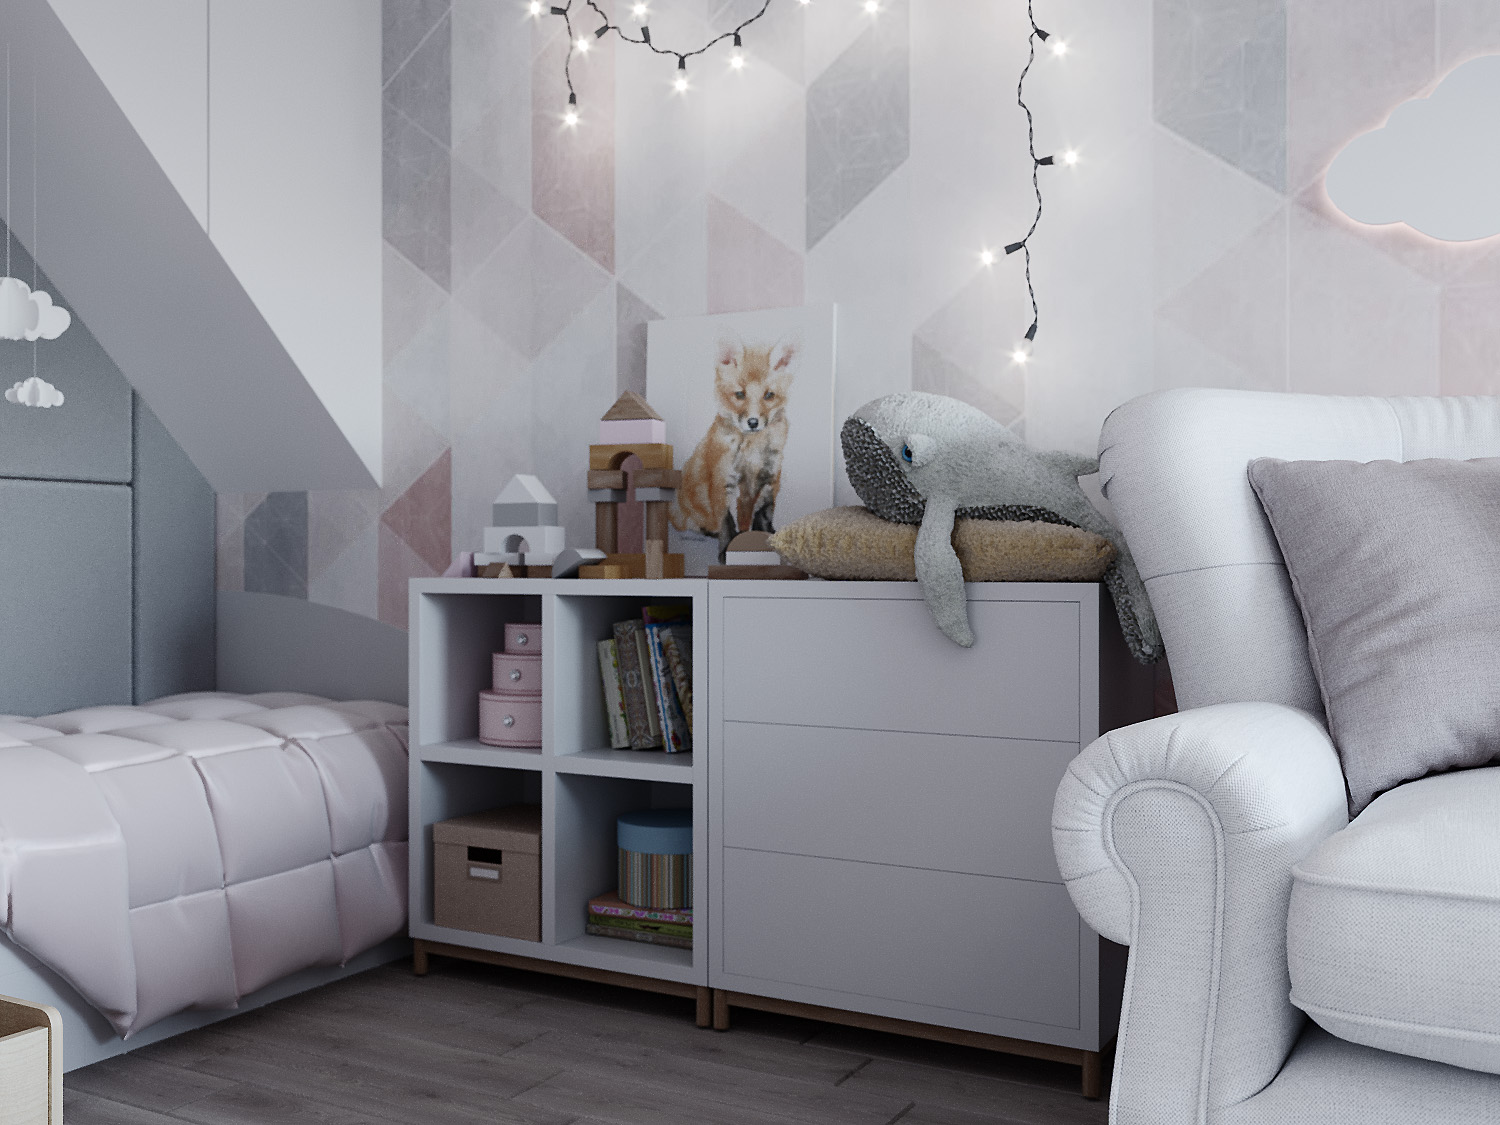 Children's room for a little girl in 3d max corona render image